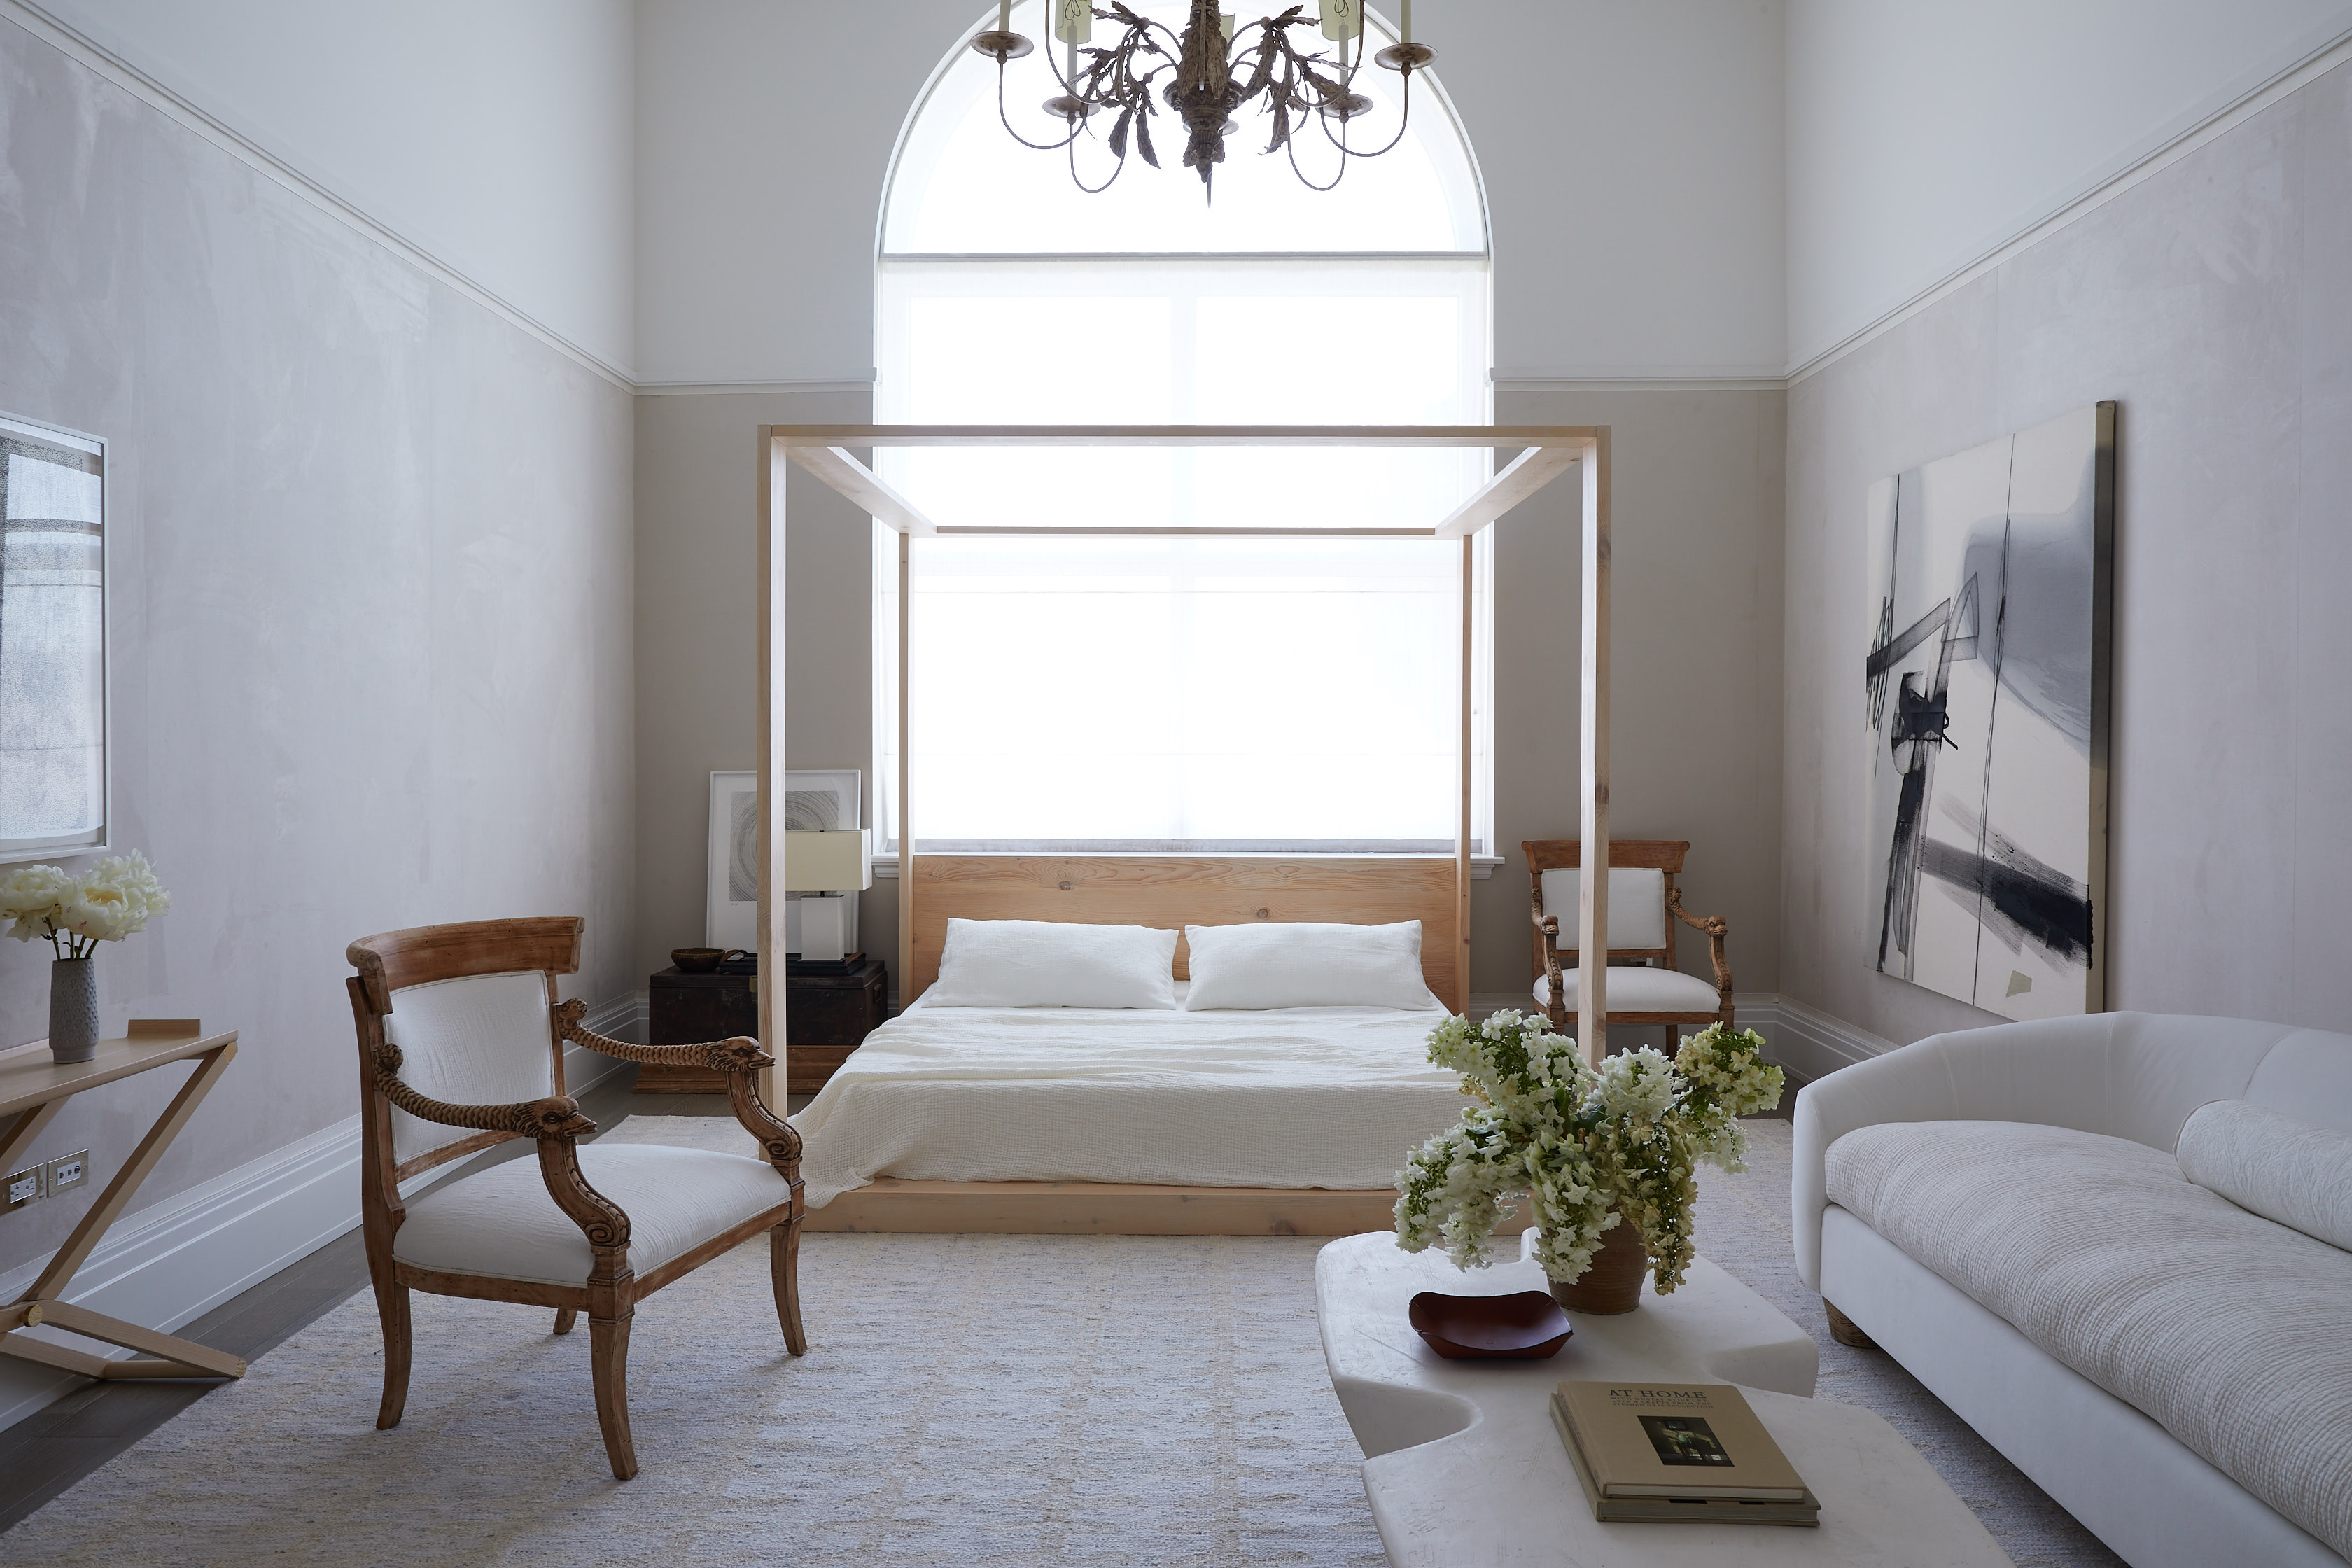 White bedroom with modern wooden bed Elle Decor Magazine by Alison Gootee Photography